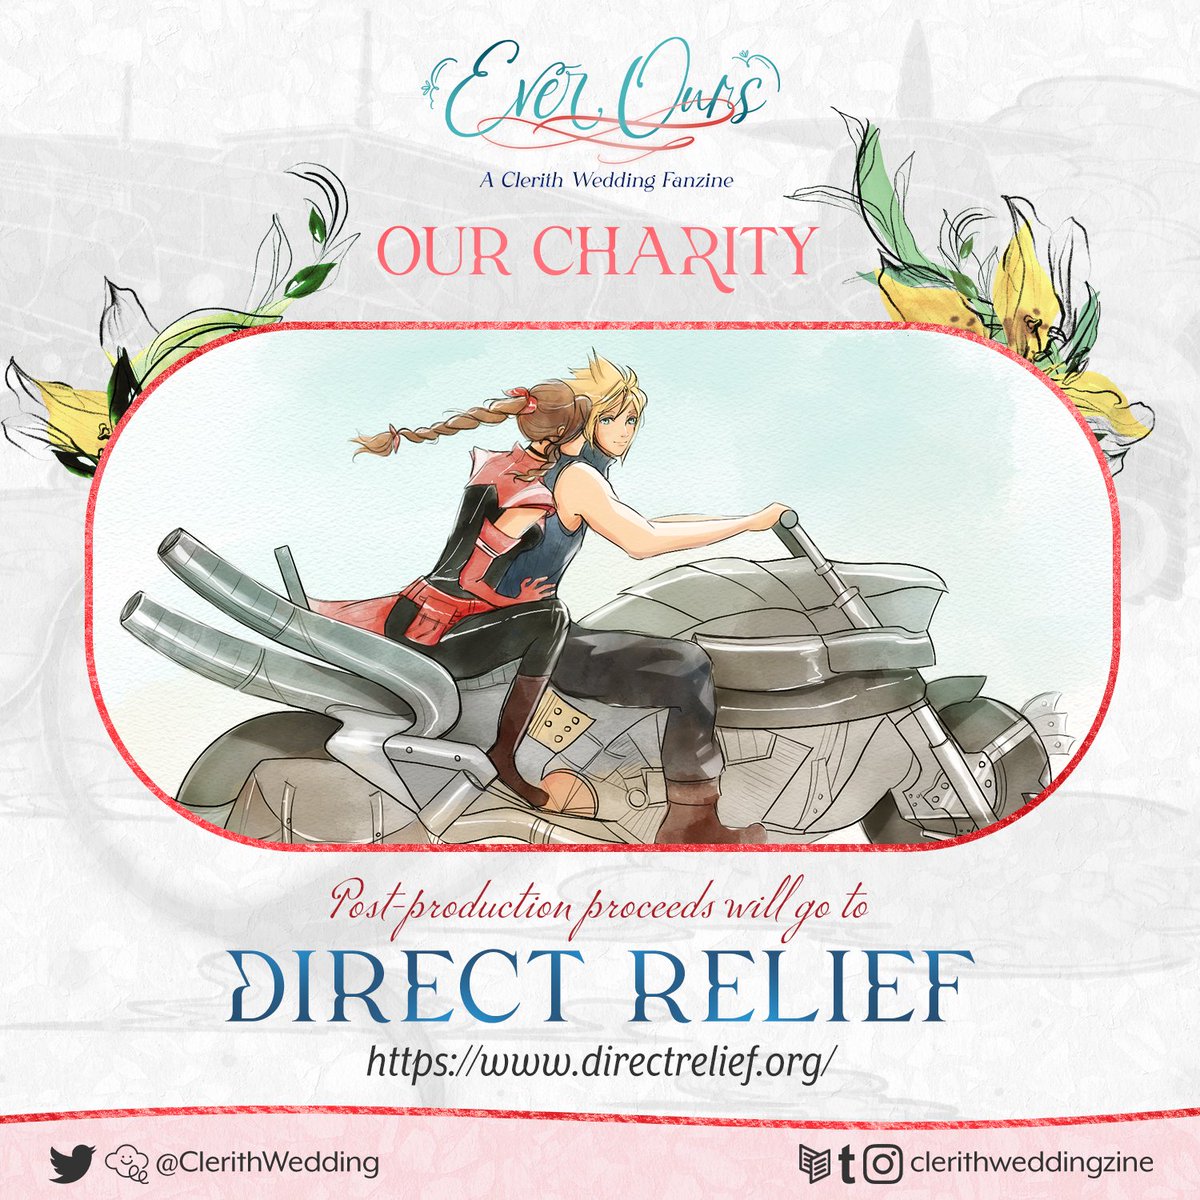 💒 CHARITY ANNOUNCEMENT We're excited to share that post-production proceeds will go to Direct Relief, a charity that provides humanitarian and disaster relief to aid people in need, and help improve health and lives of people affected by poverty or disasters around the world.